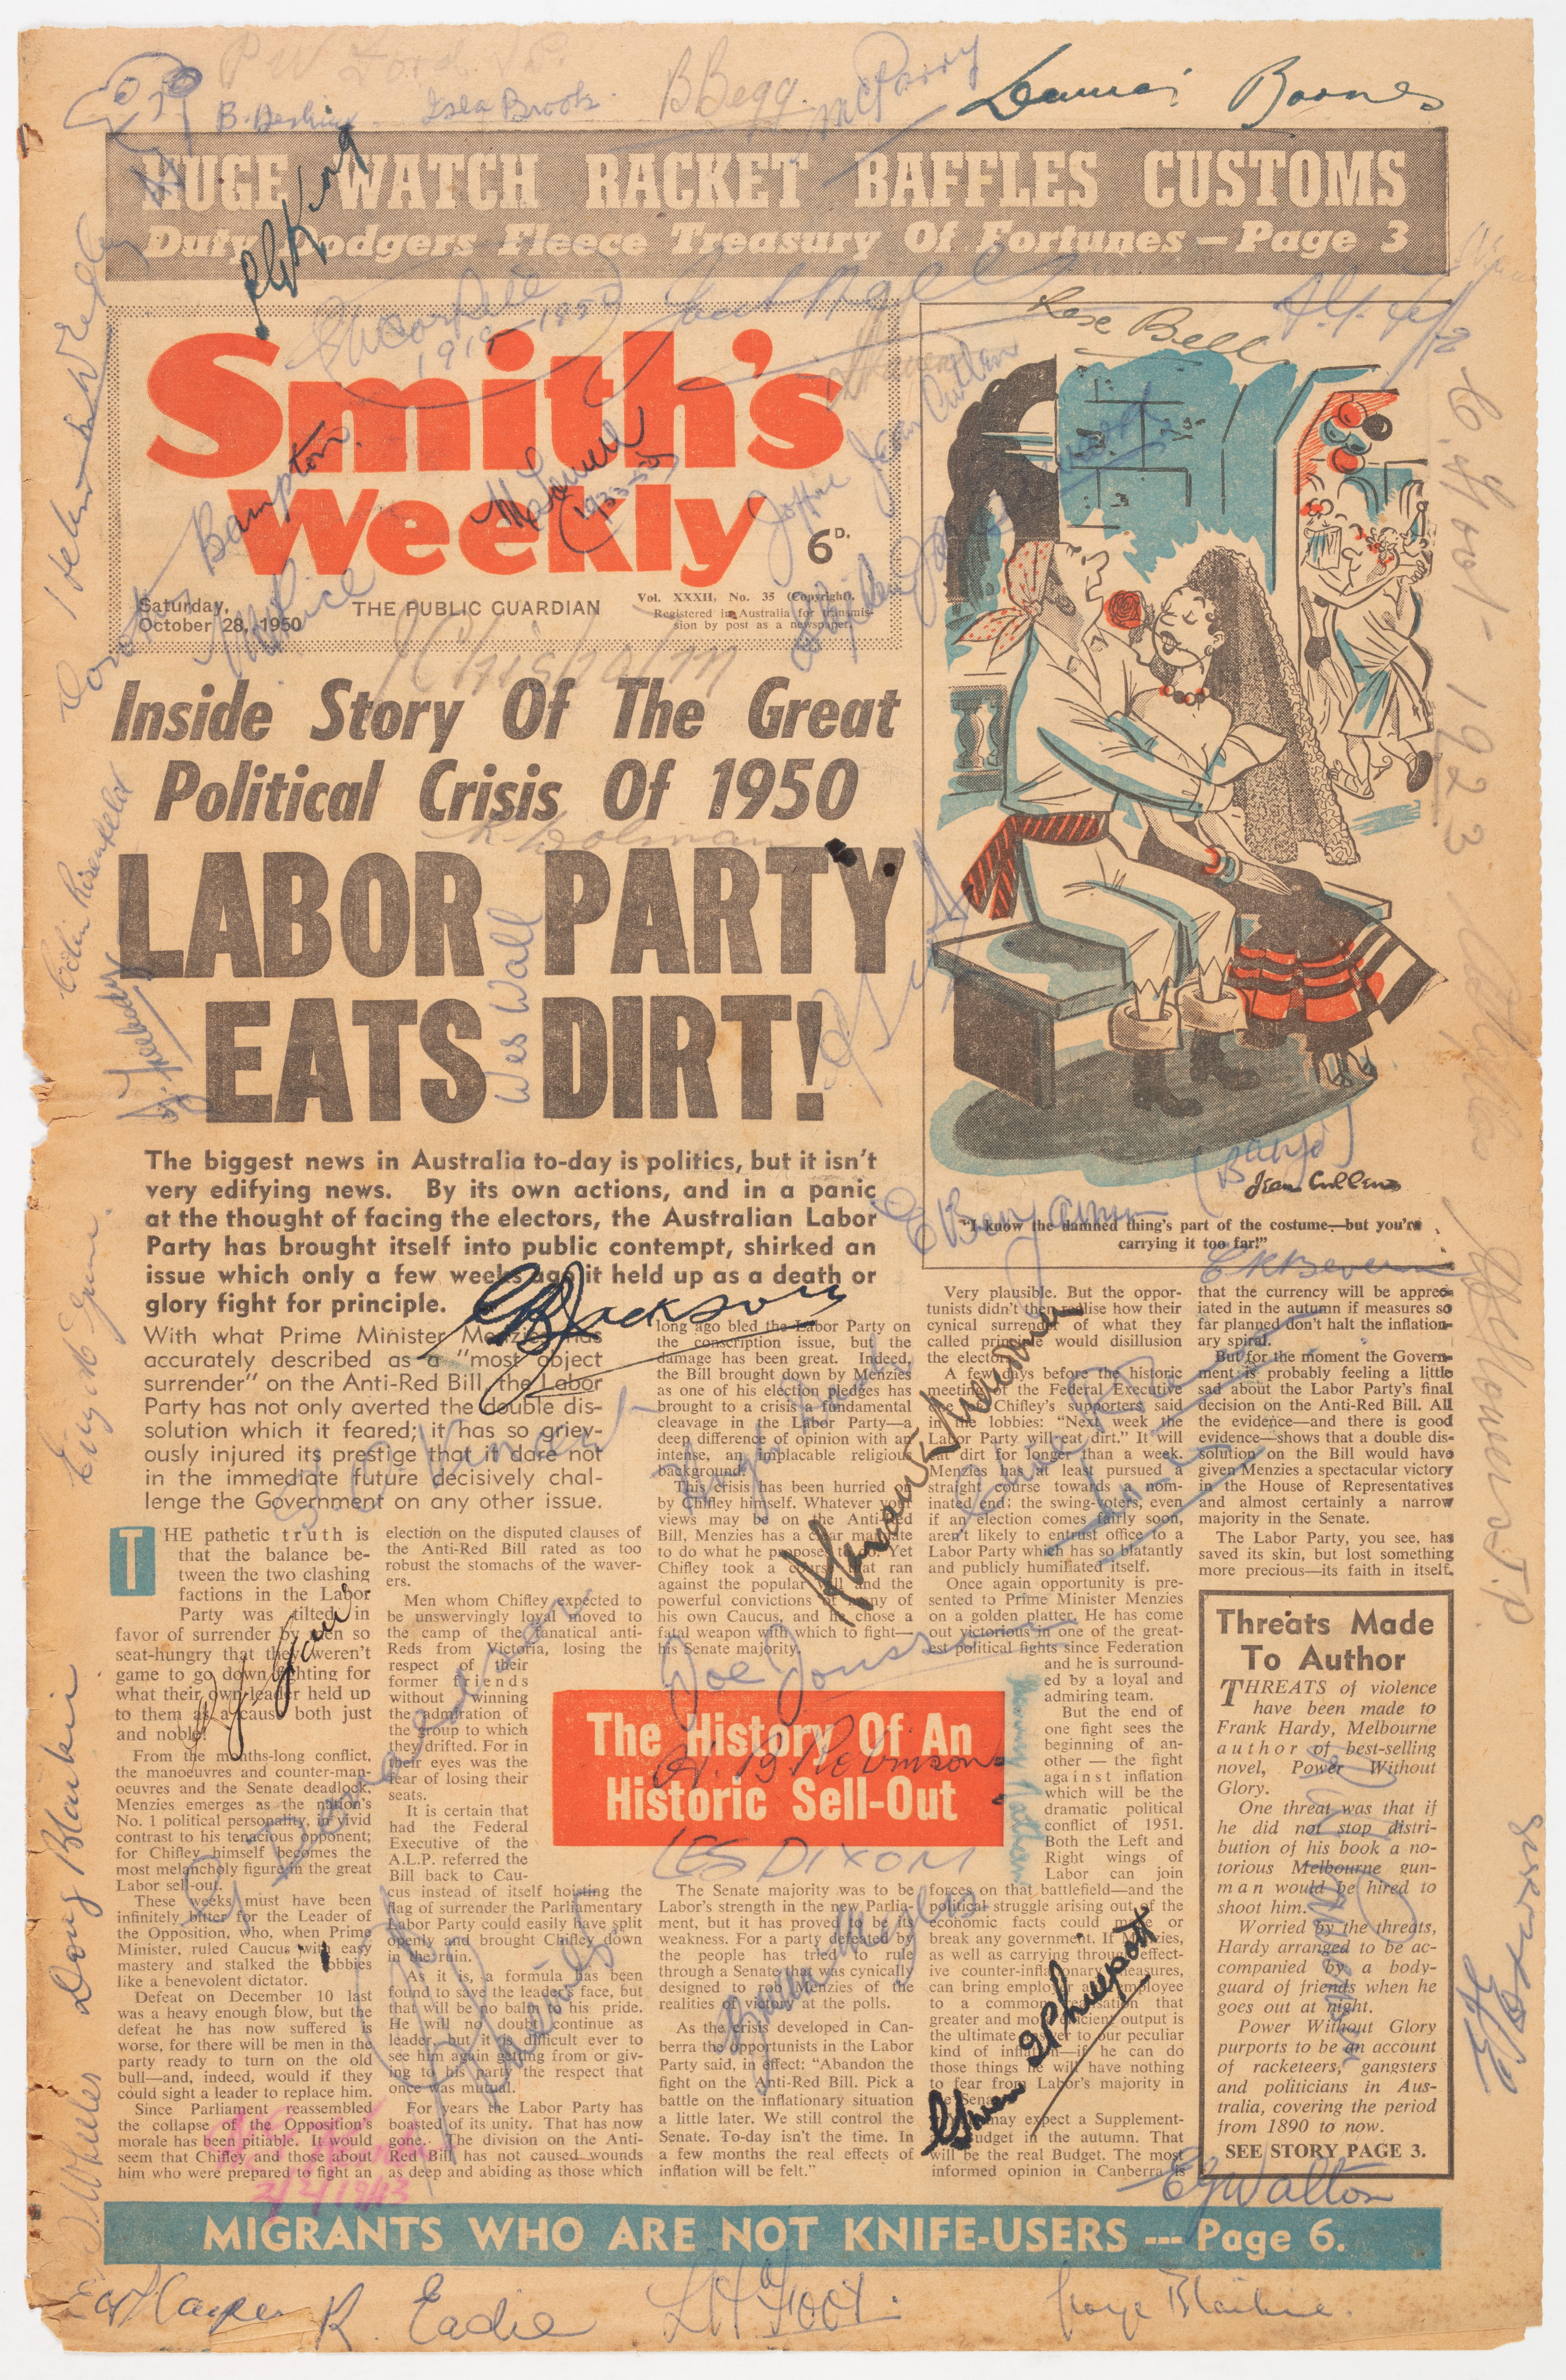 The front page of a vintage newspaper with signatures by artists, journalists and production staff.